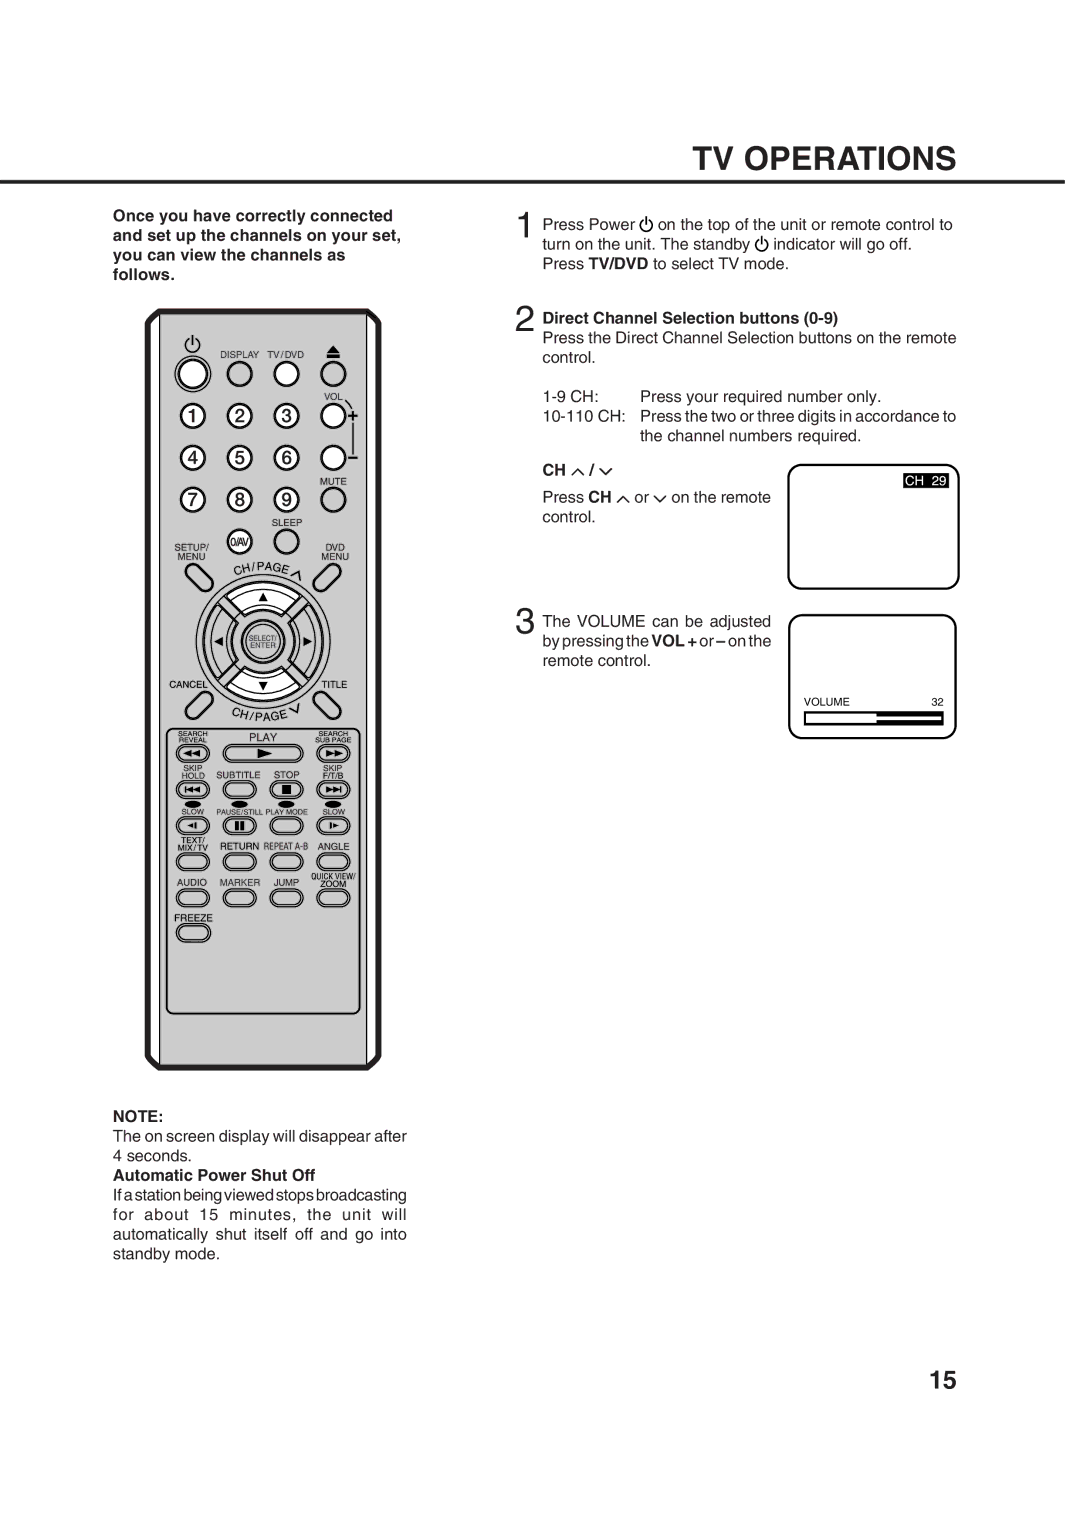 Orion 14LD manual TV Operations, Automatic Power Shut Off, Direct Channel Selection buttons, Ch M / ? 